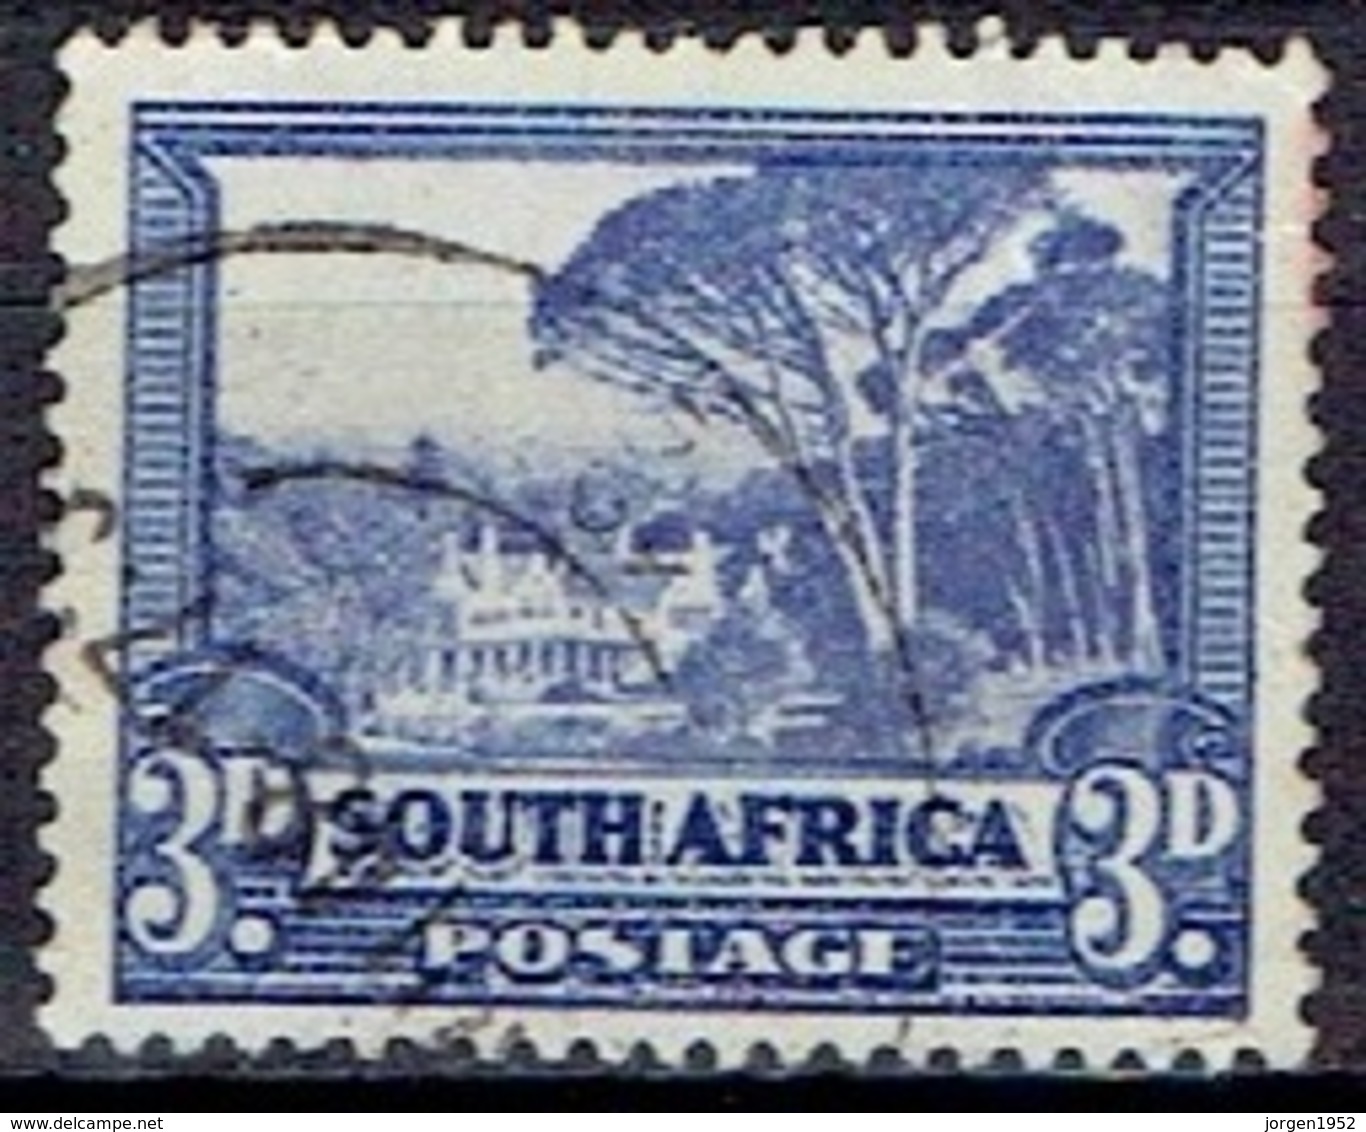 GREAT BRITAIN # SOUTH AFRICA FROM 1930-45  STAMPWORLD 56 - Nuova Repubblica (1886-1887)